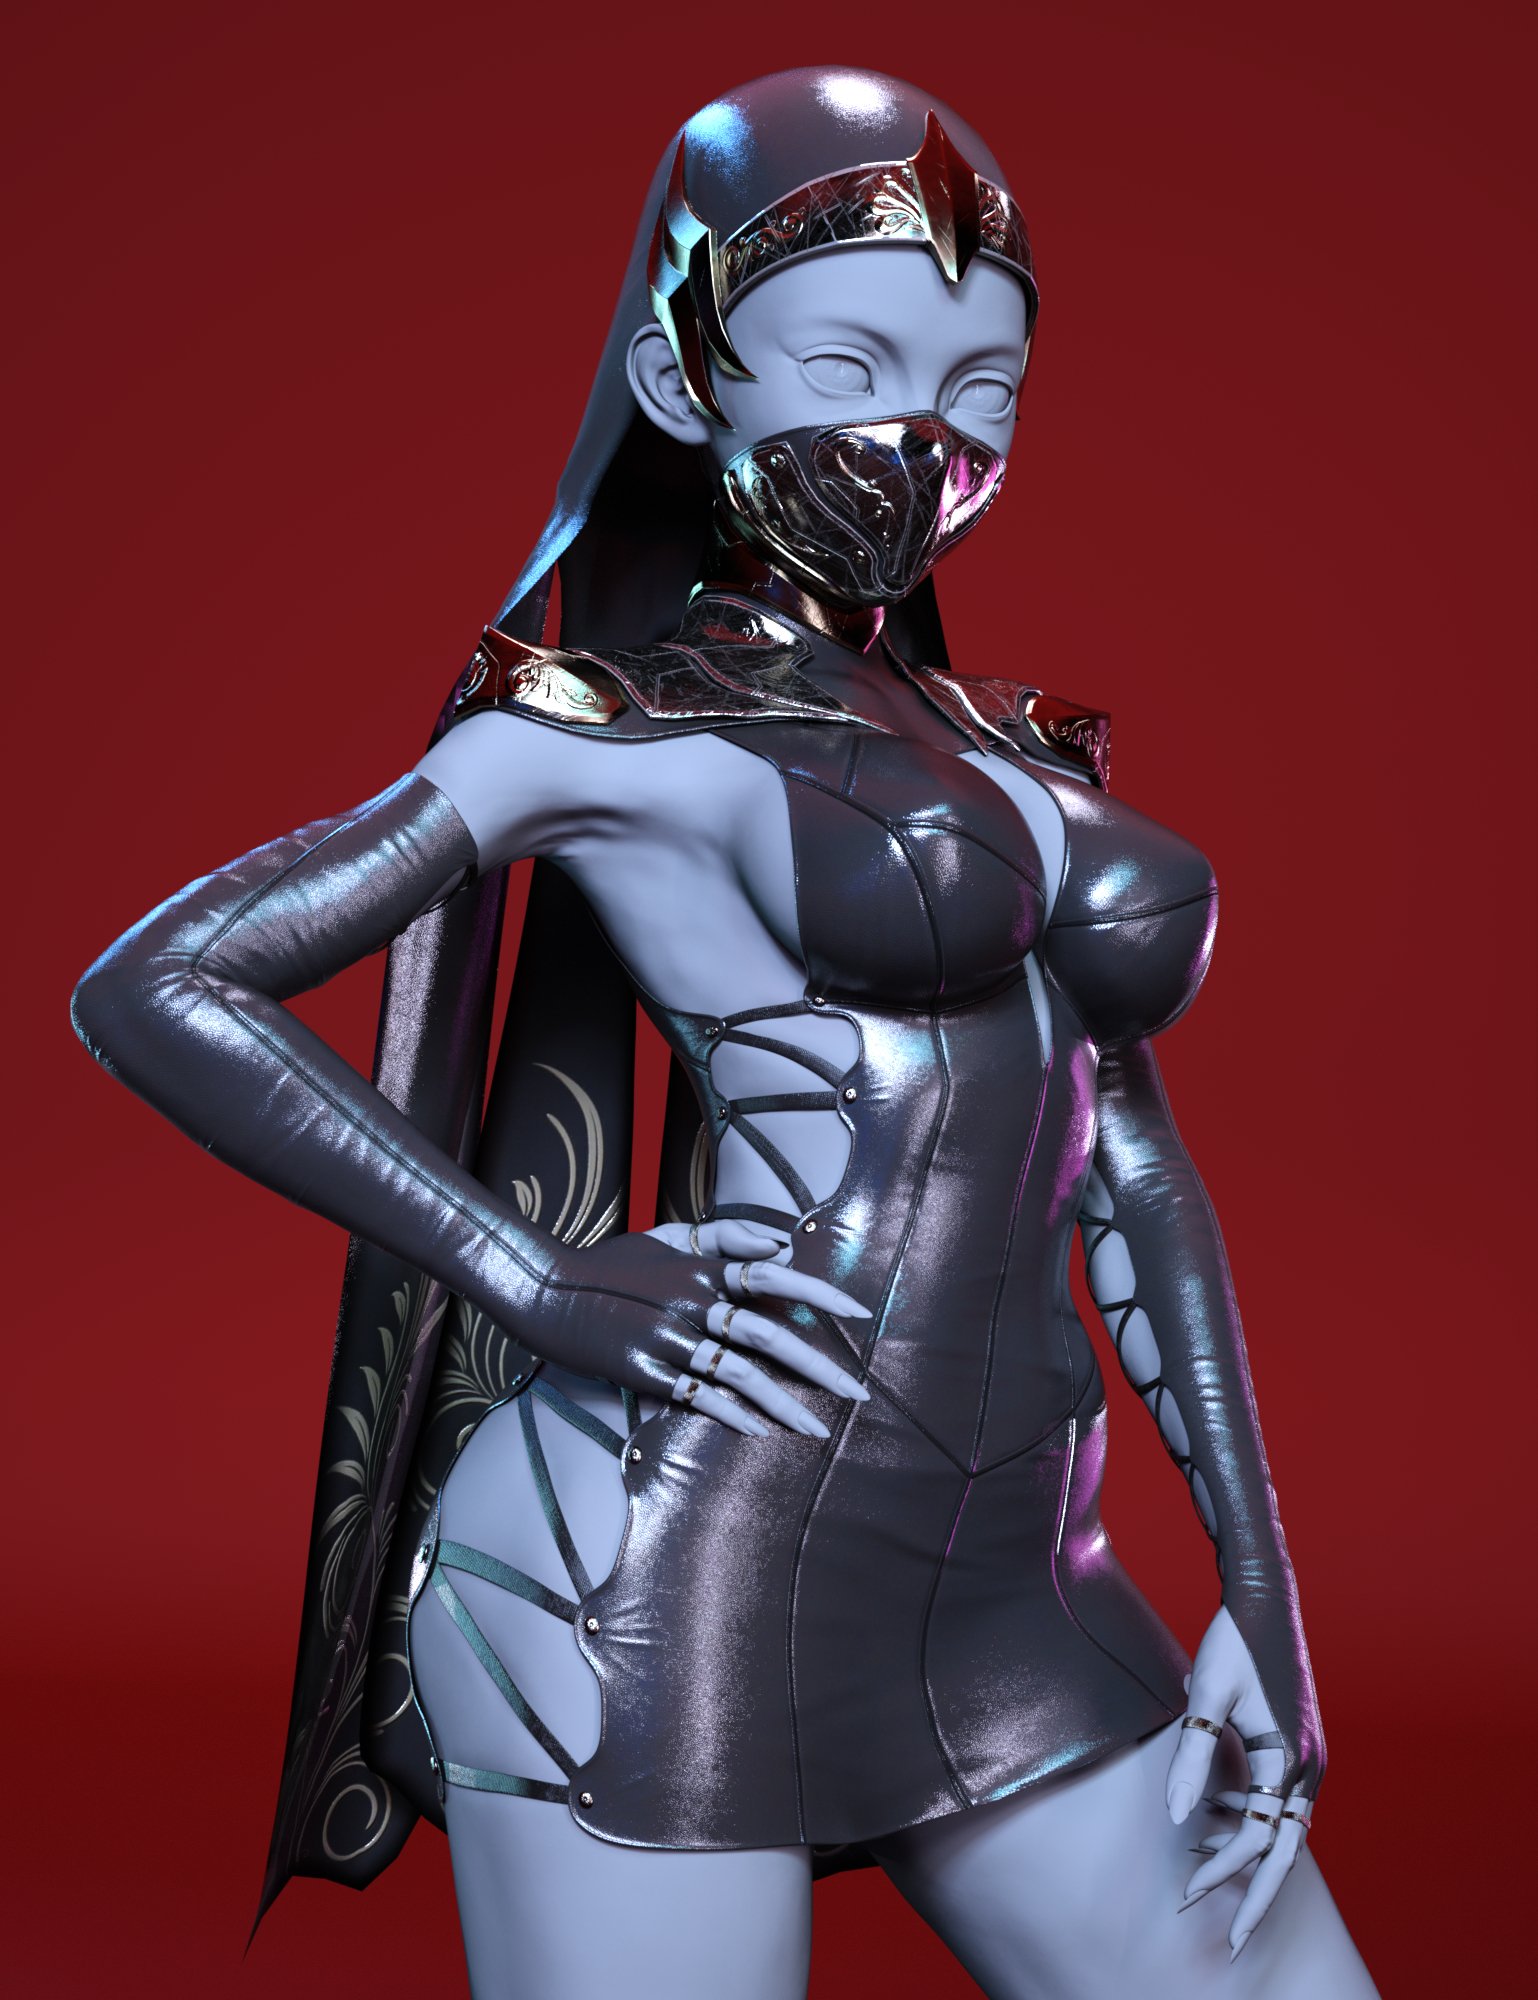 dForce Assassin Sister Outfit for Genesis 8 and 8.1 Females by: HM, 3D Models by Daz 3D